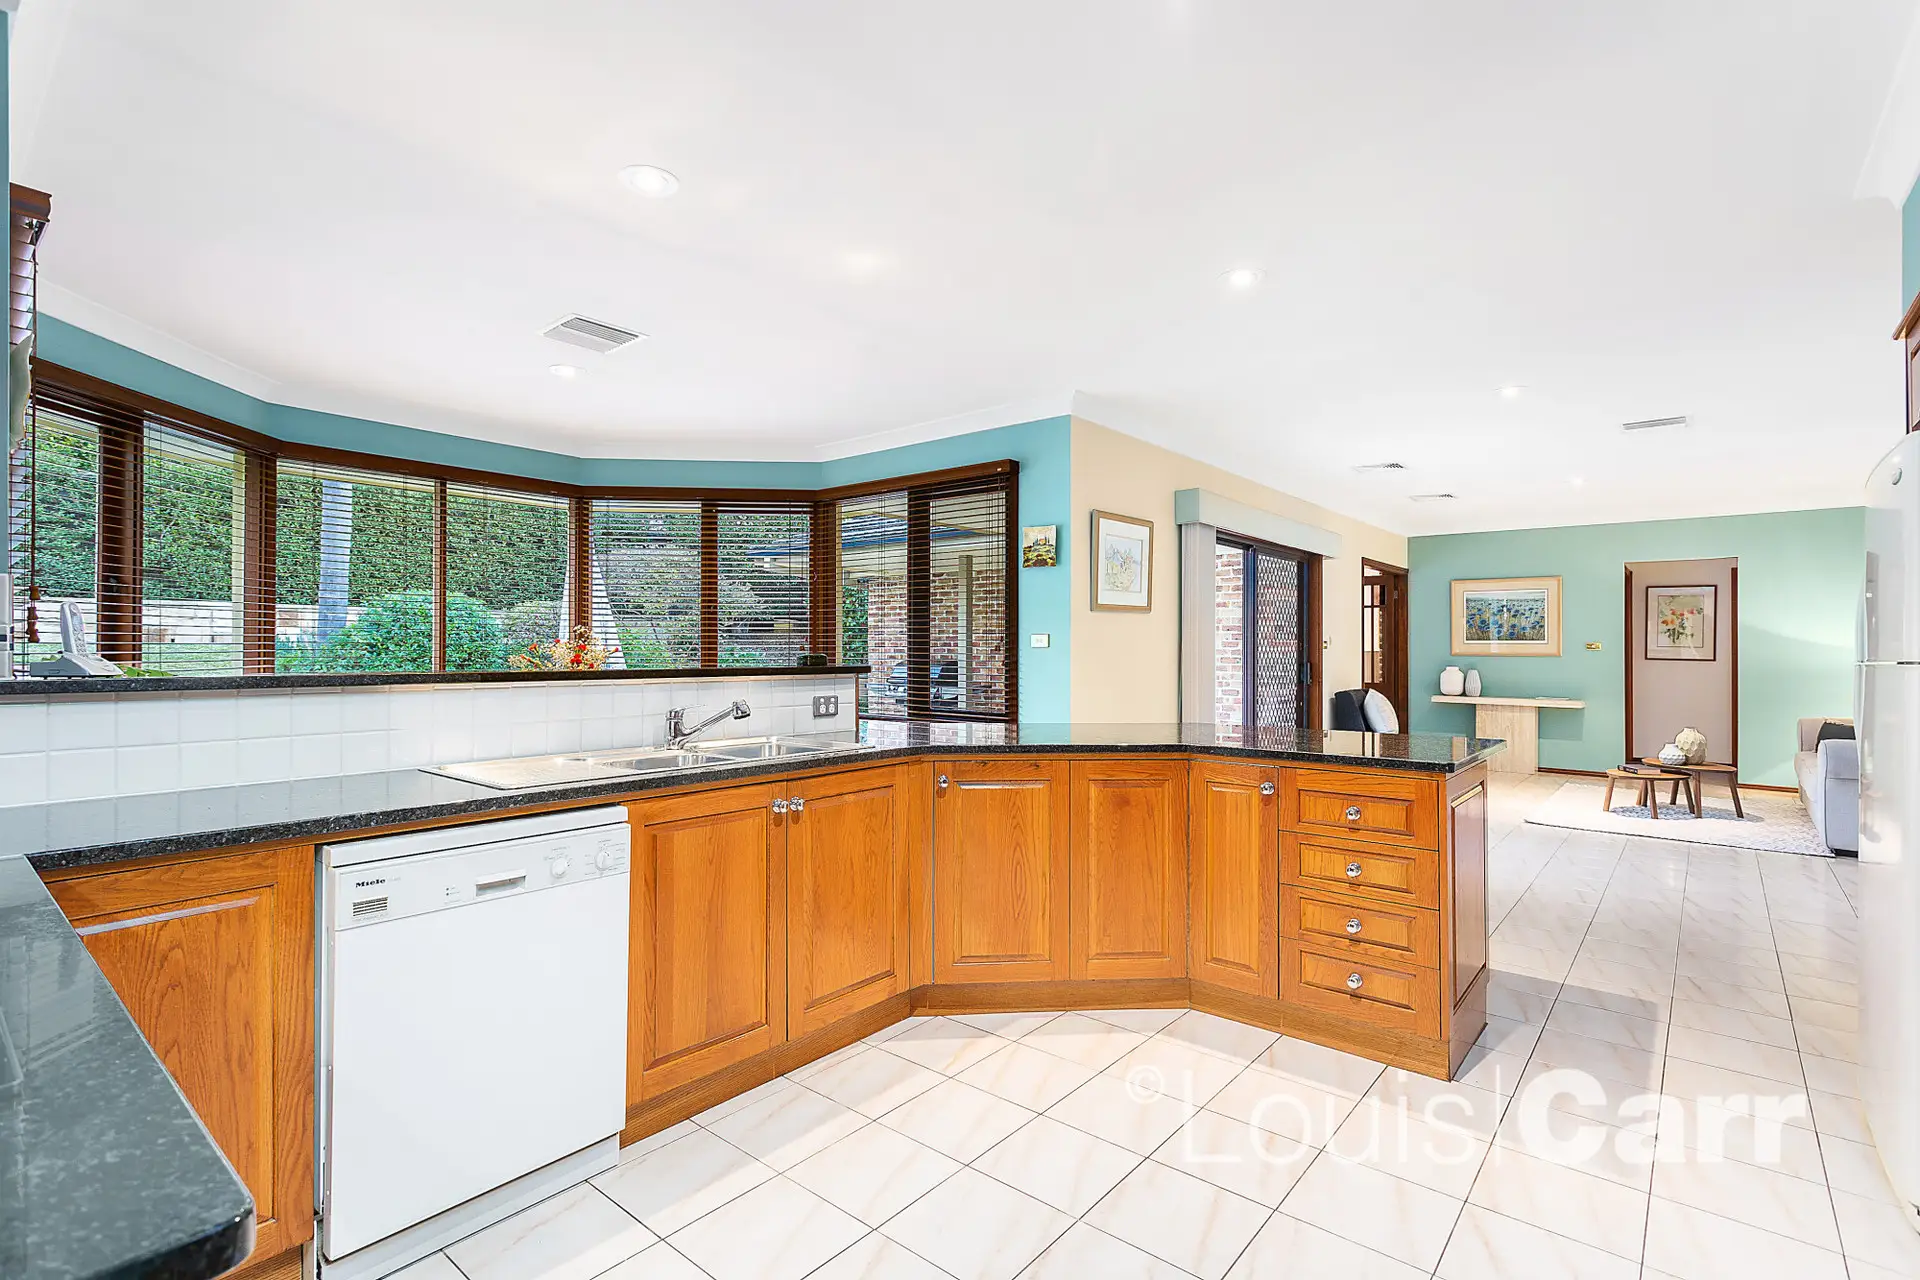 Photo #4: 7 Rosella Way, West Pennant Hills - Sold by Louis Carr Real Estate